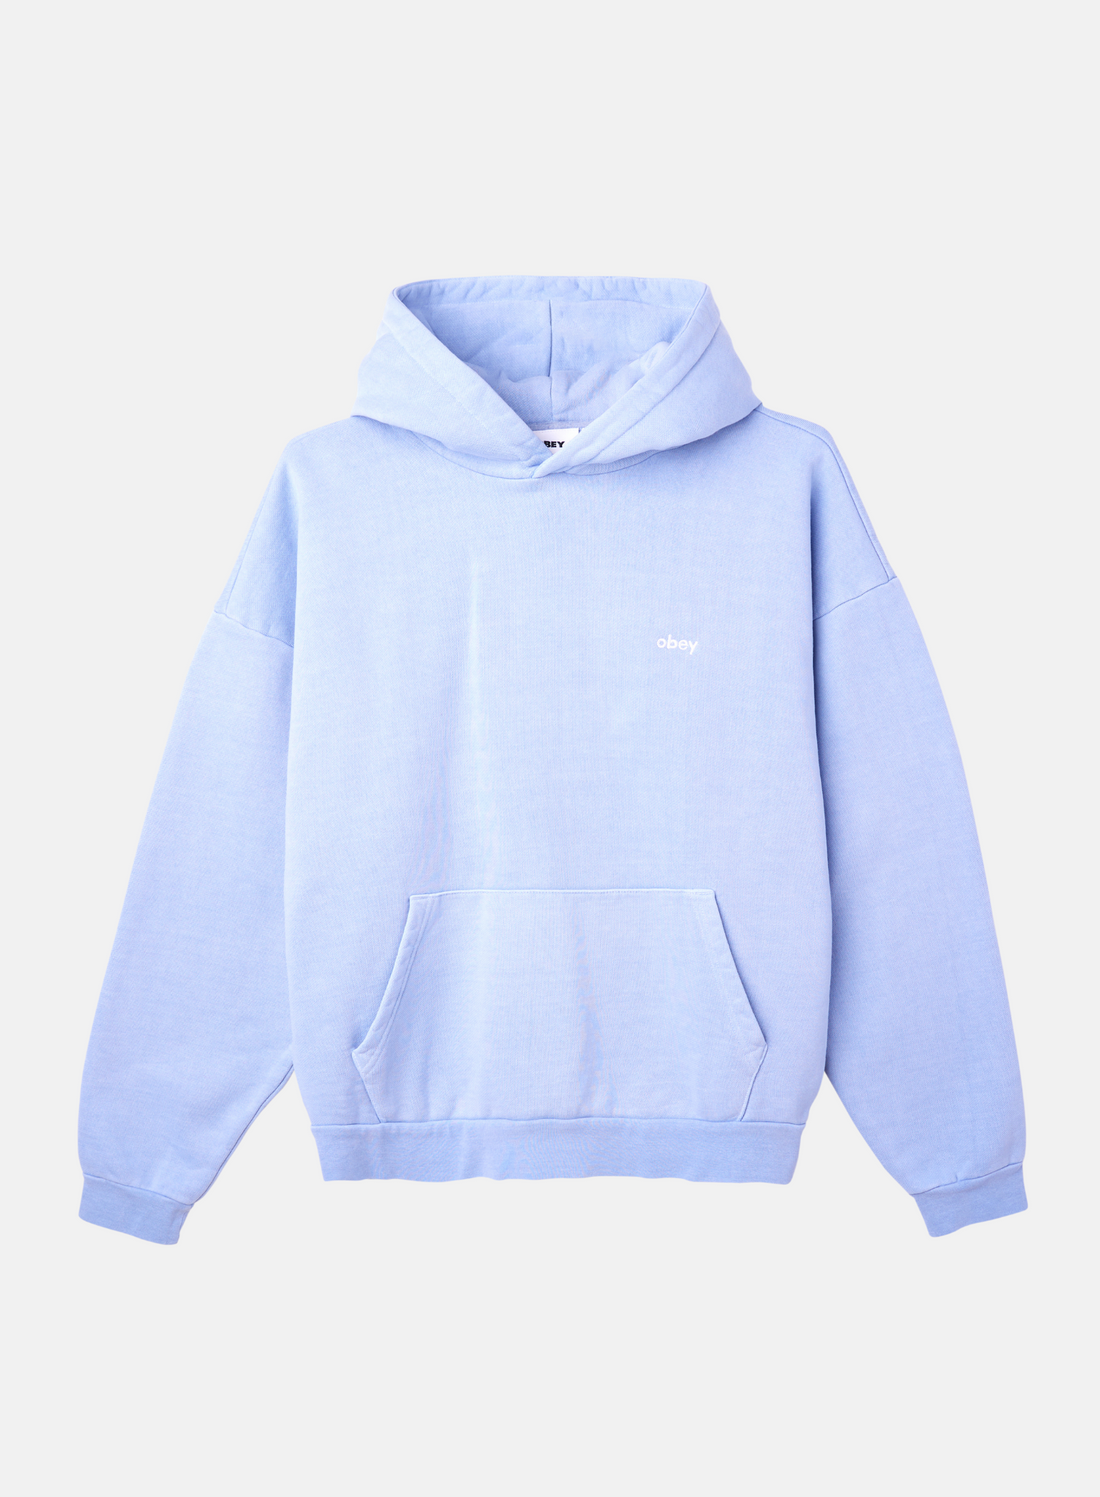 OBEY Pigment Dyed Hoodie Blue - Hympala Store 